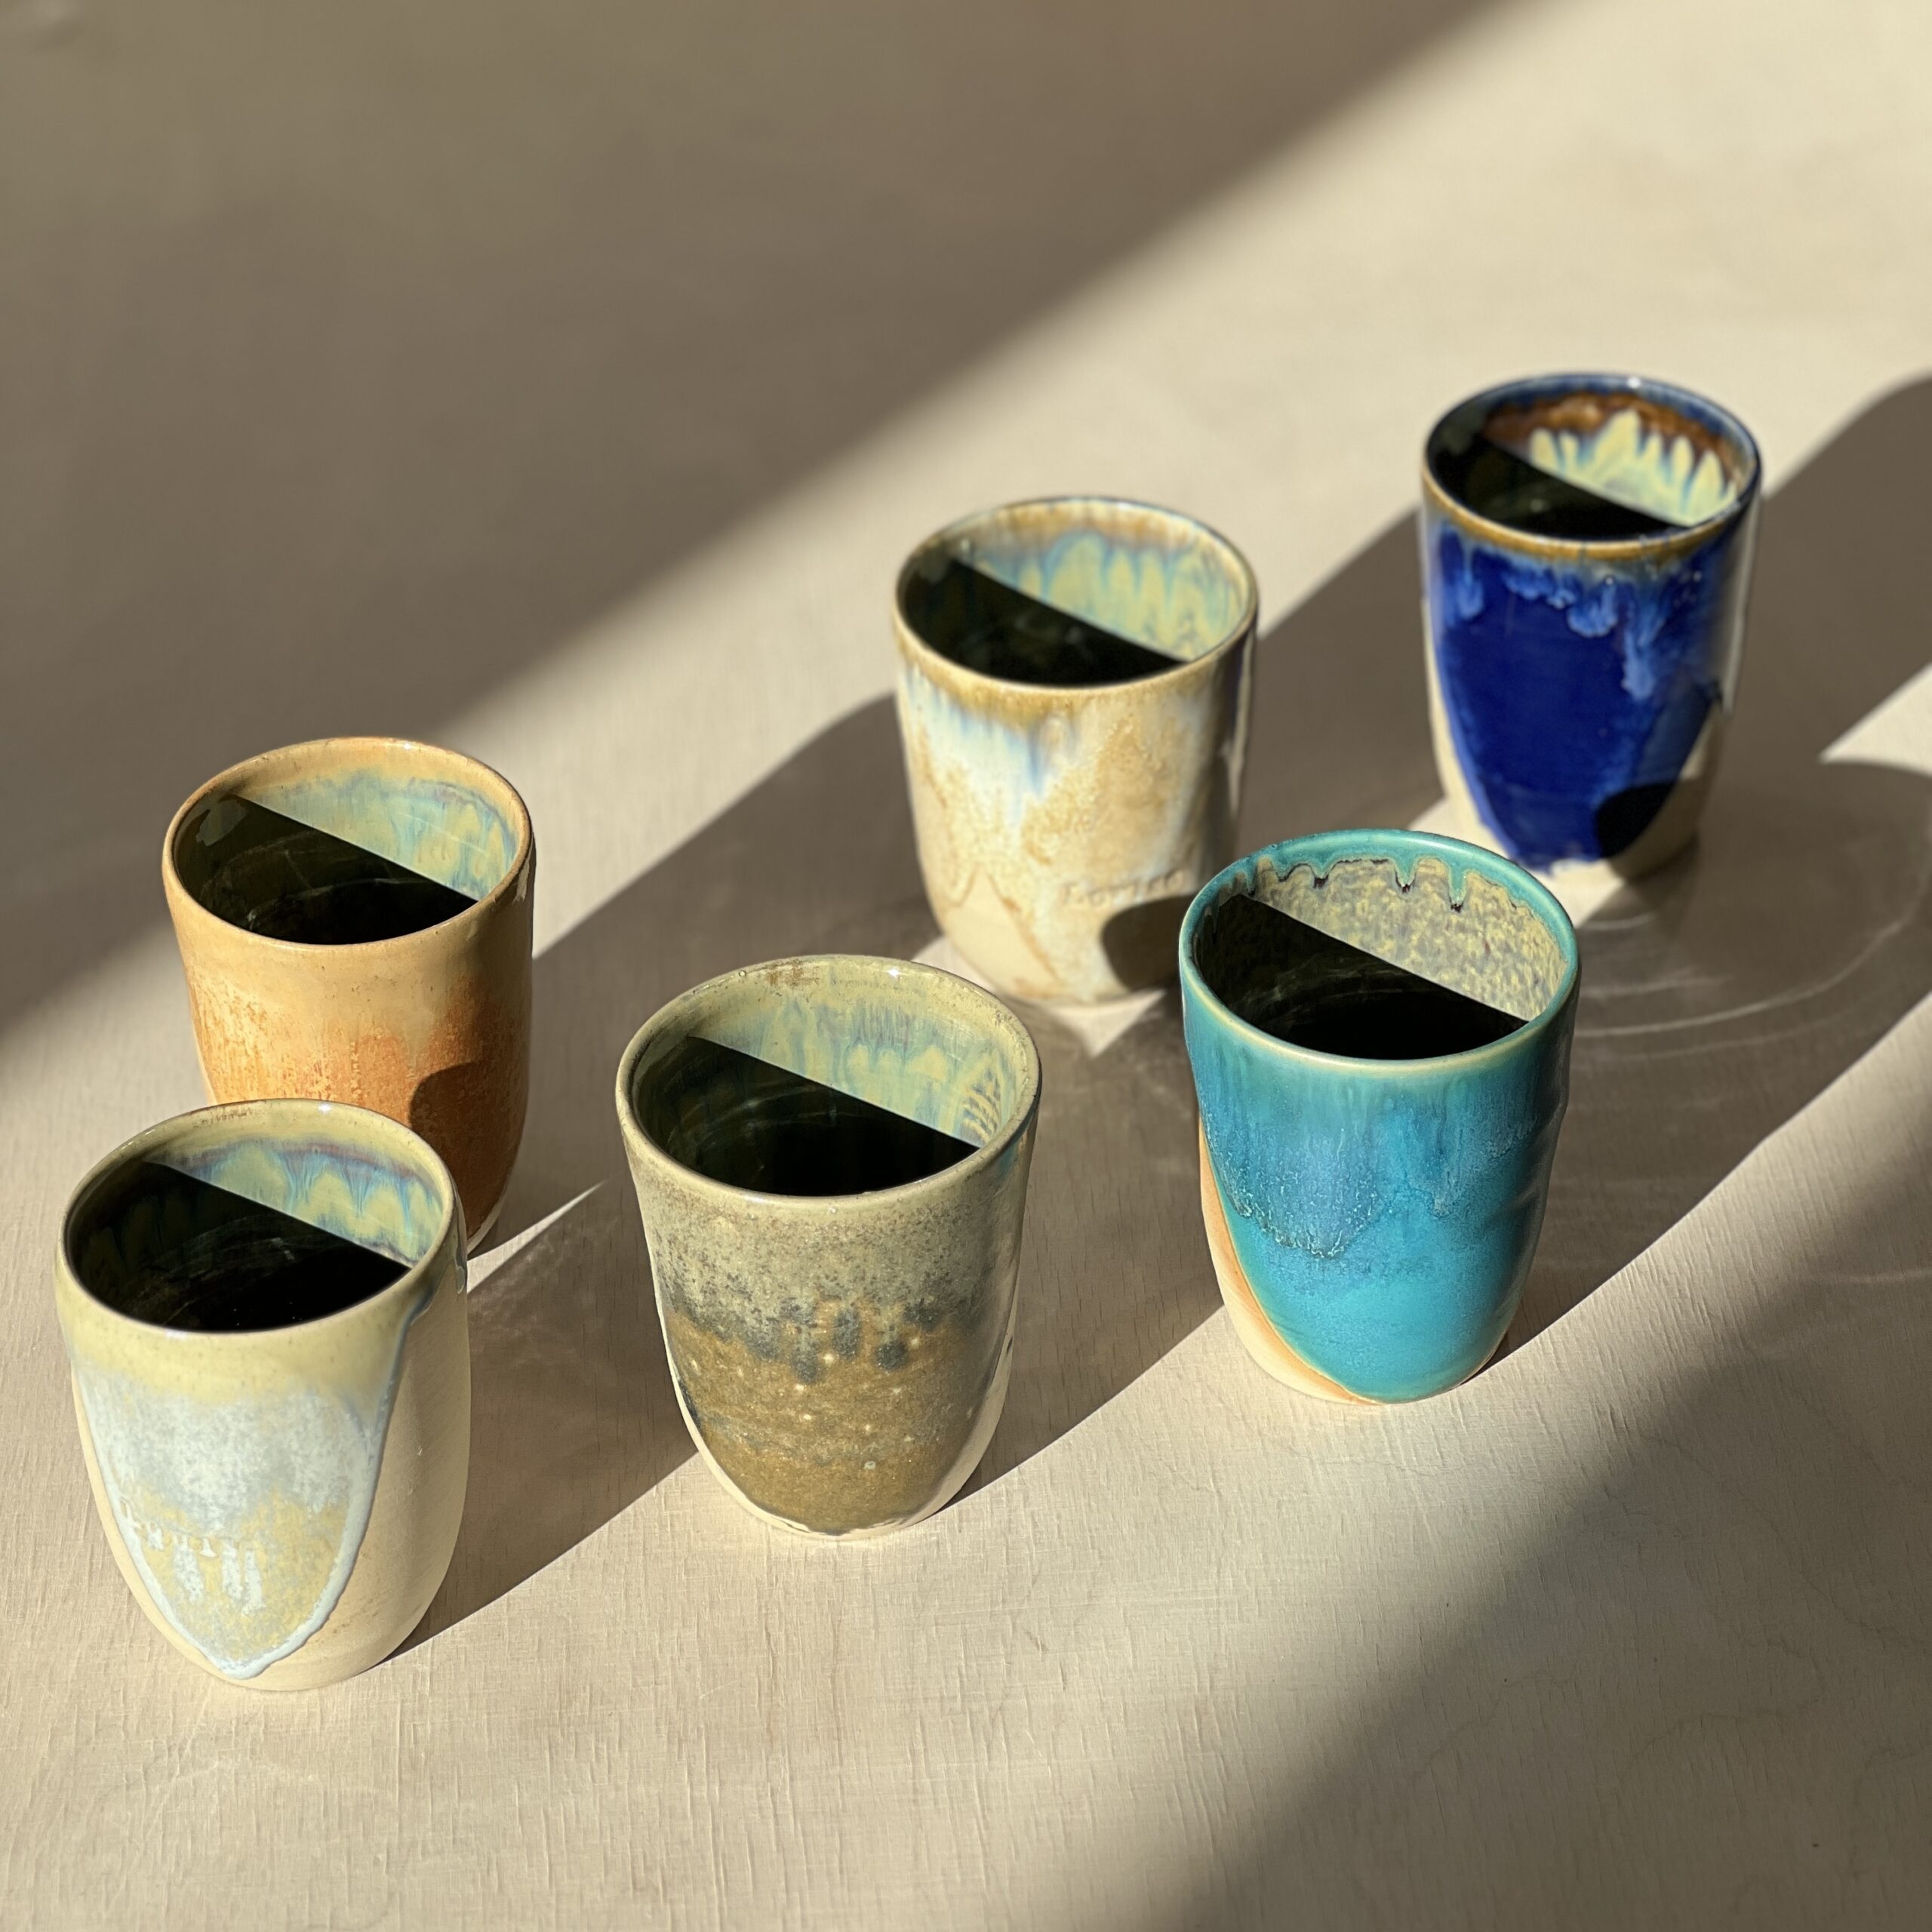 Glaze workshop Hietzing *Additional course glazing course for your own ceramics